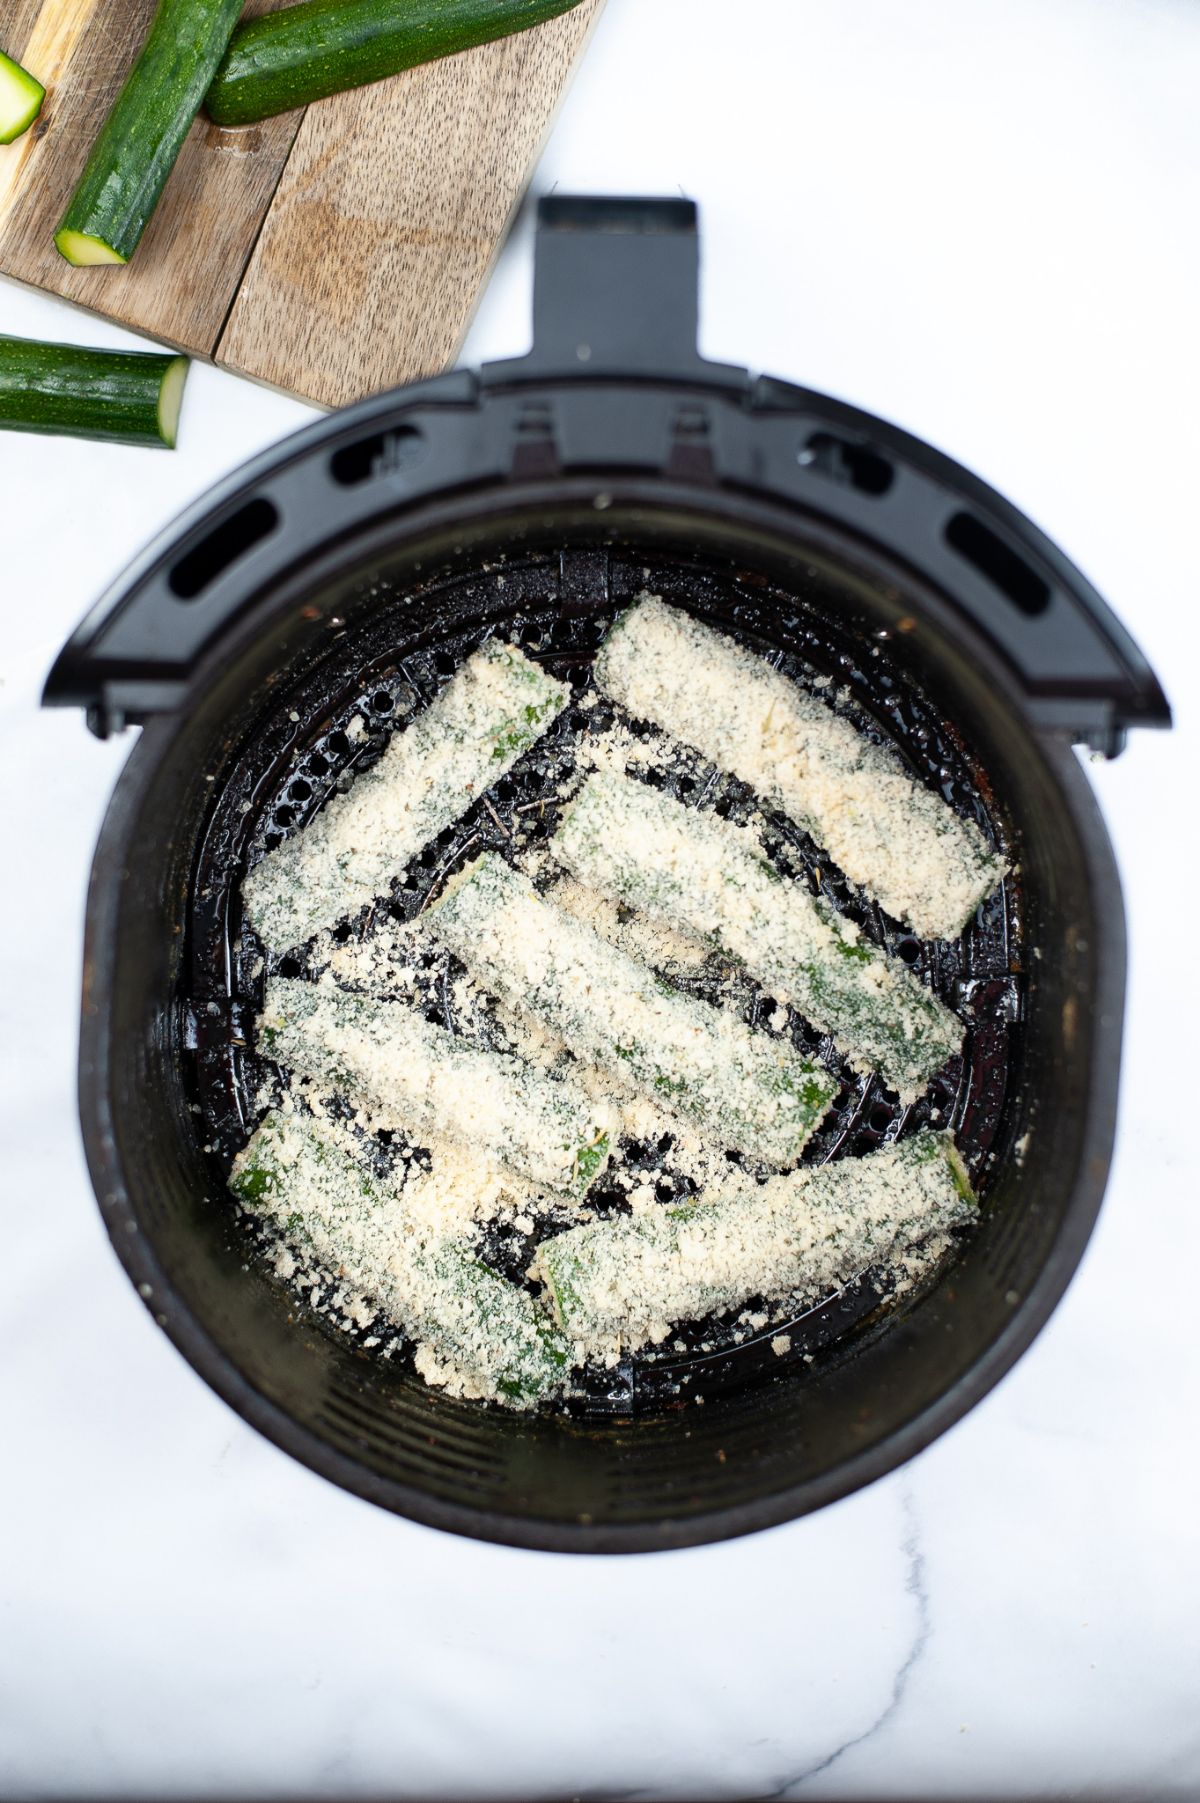 Coated Zucchinis in an air fryer basket.